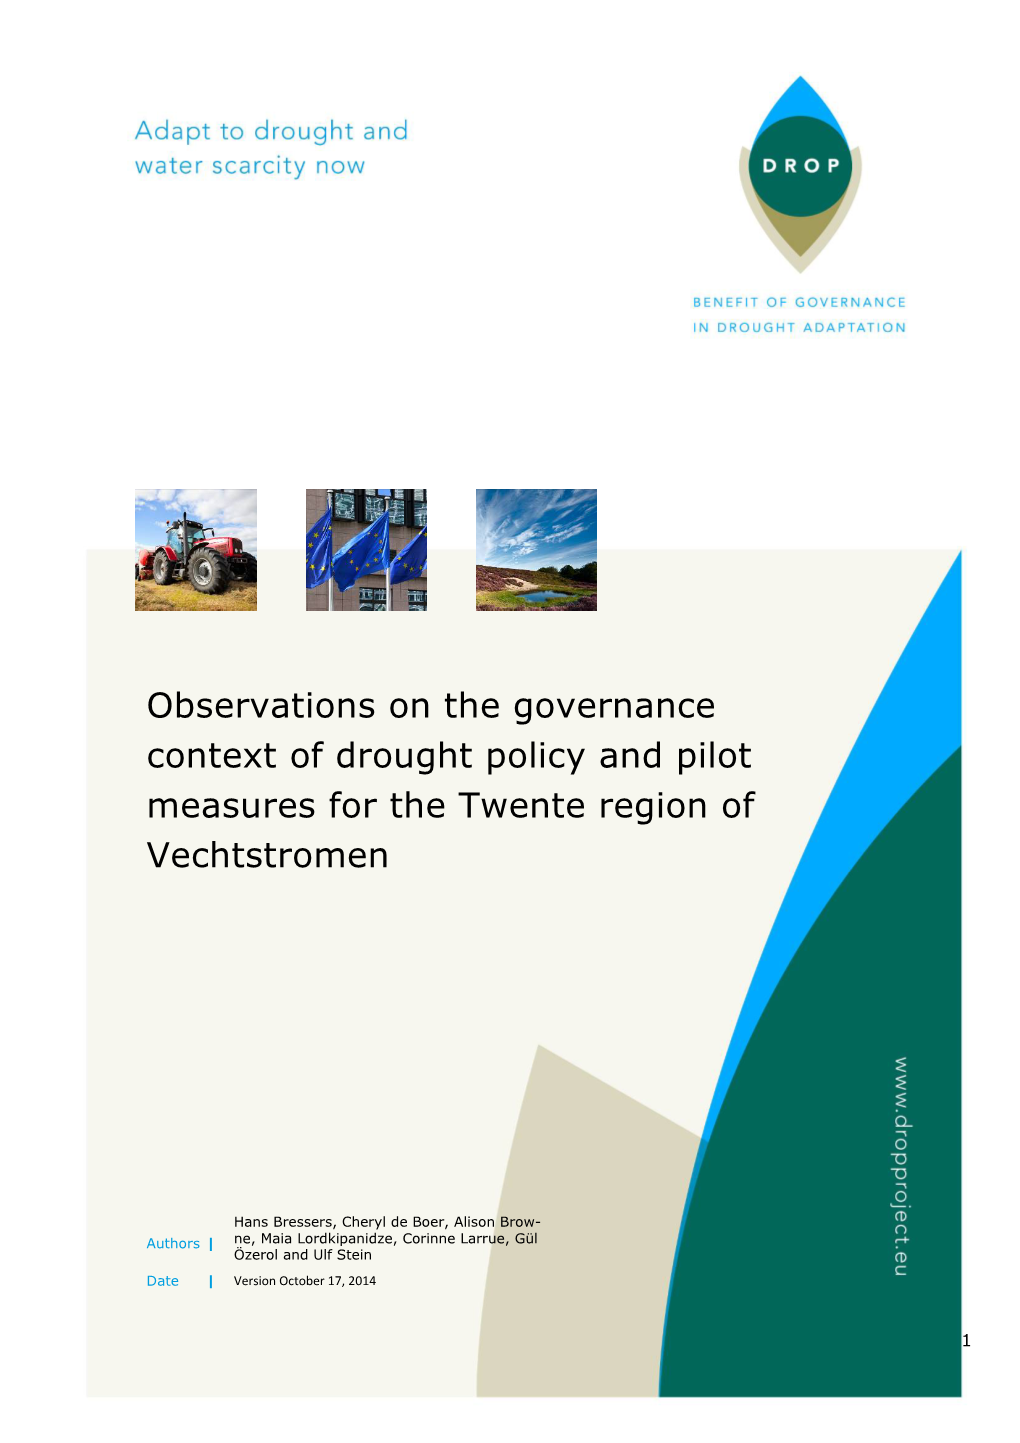 Observations on the Governance Context of Drought Policy and Pilot Measures for the Twente Region of Vechtstromen